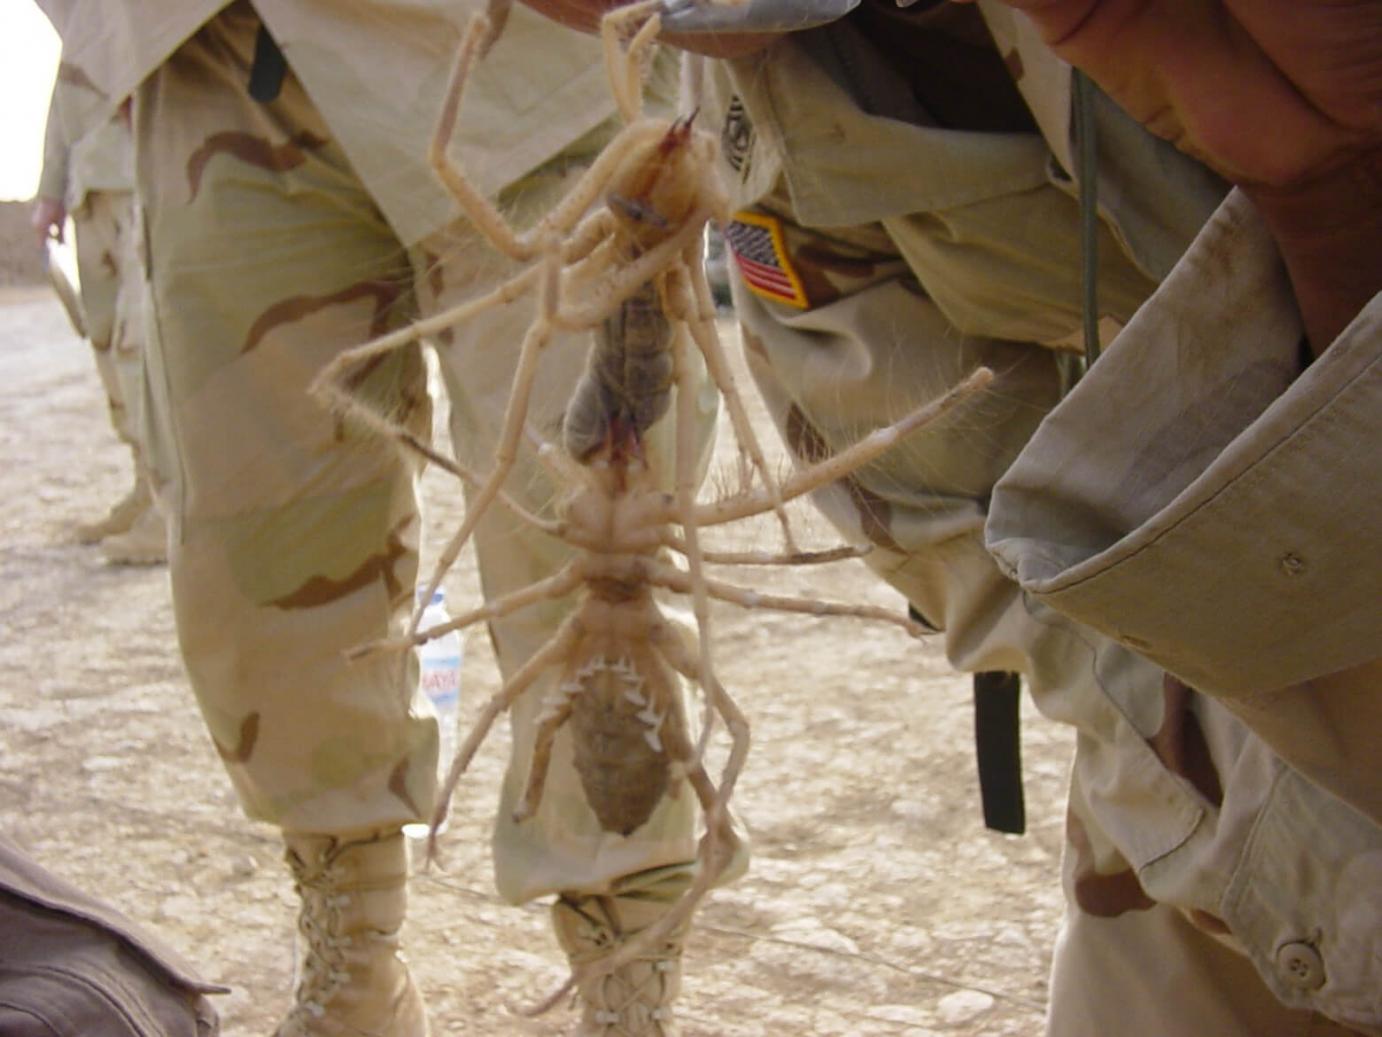 a spider is held by comrades in the armed forces while over seas